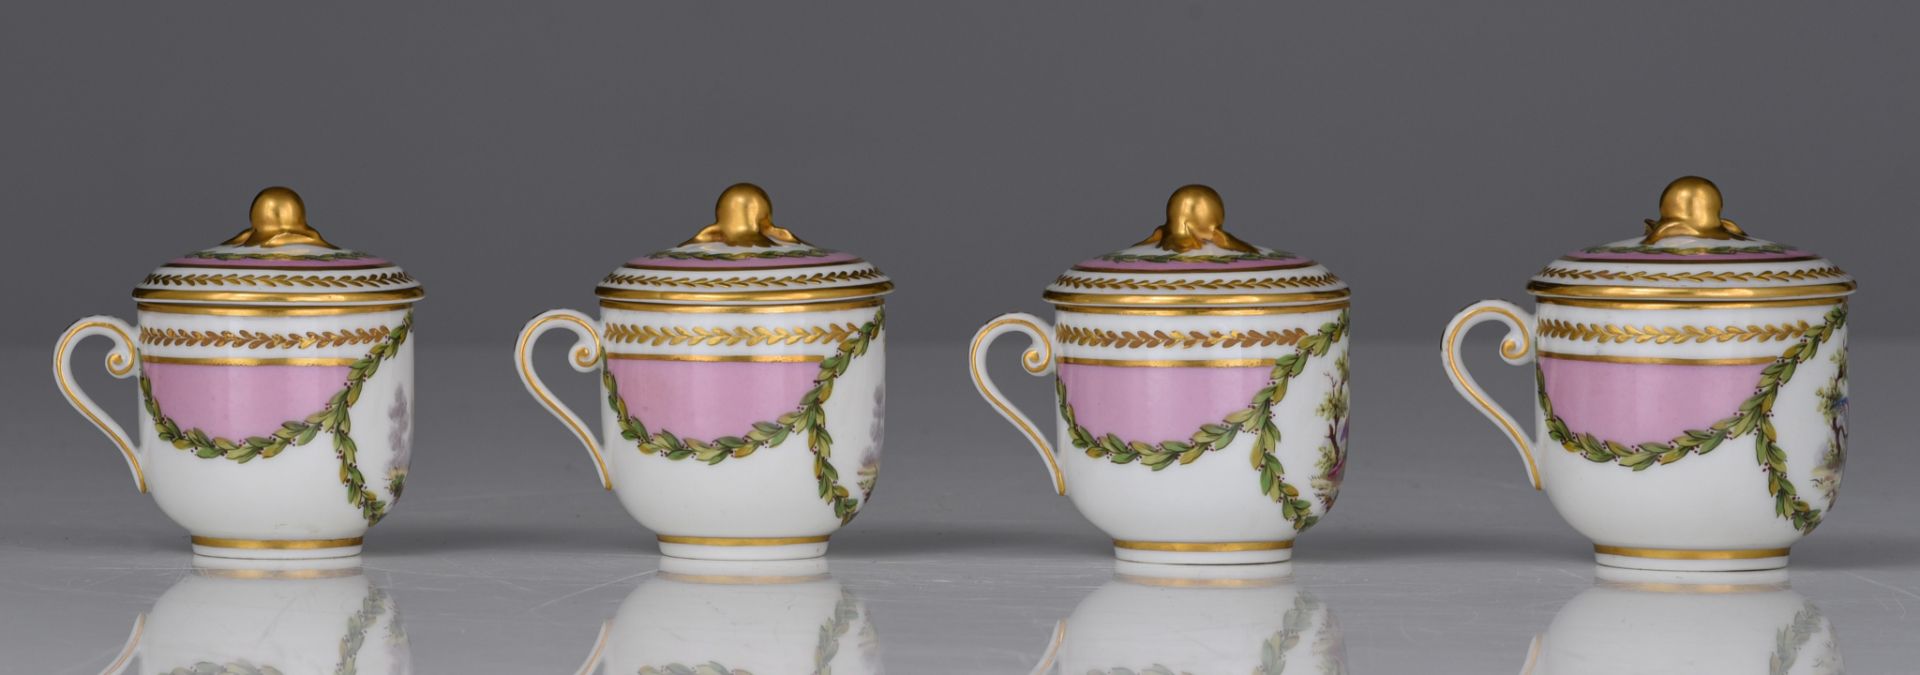 (BIDDING ONLY ON CARLOBONTE.BE) A 12 person Sevres porcelain set of dessert cups on a matching tray, - Image 18 of 18